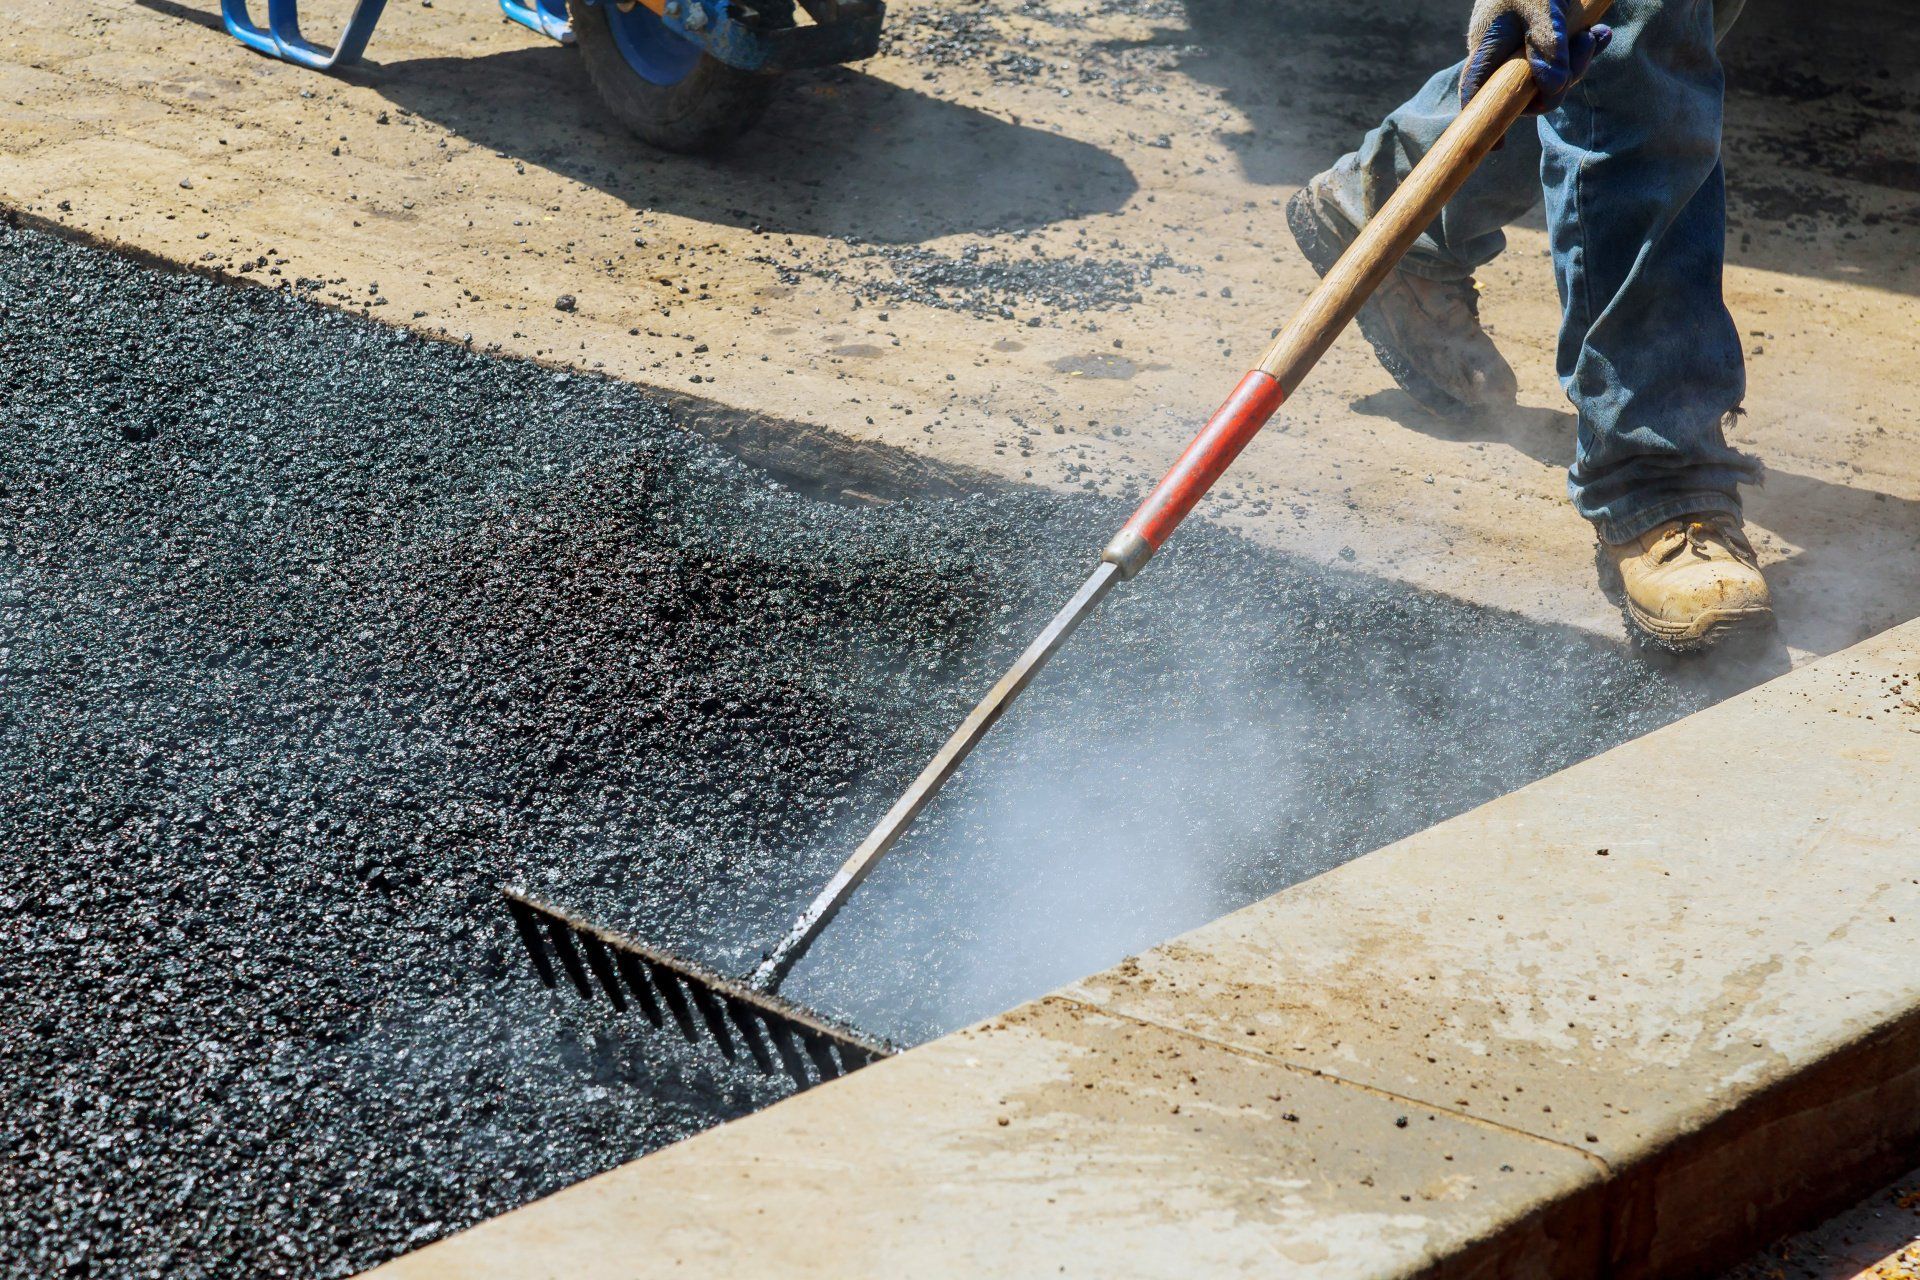 A worker spreading new asphalt before rolling